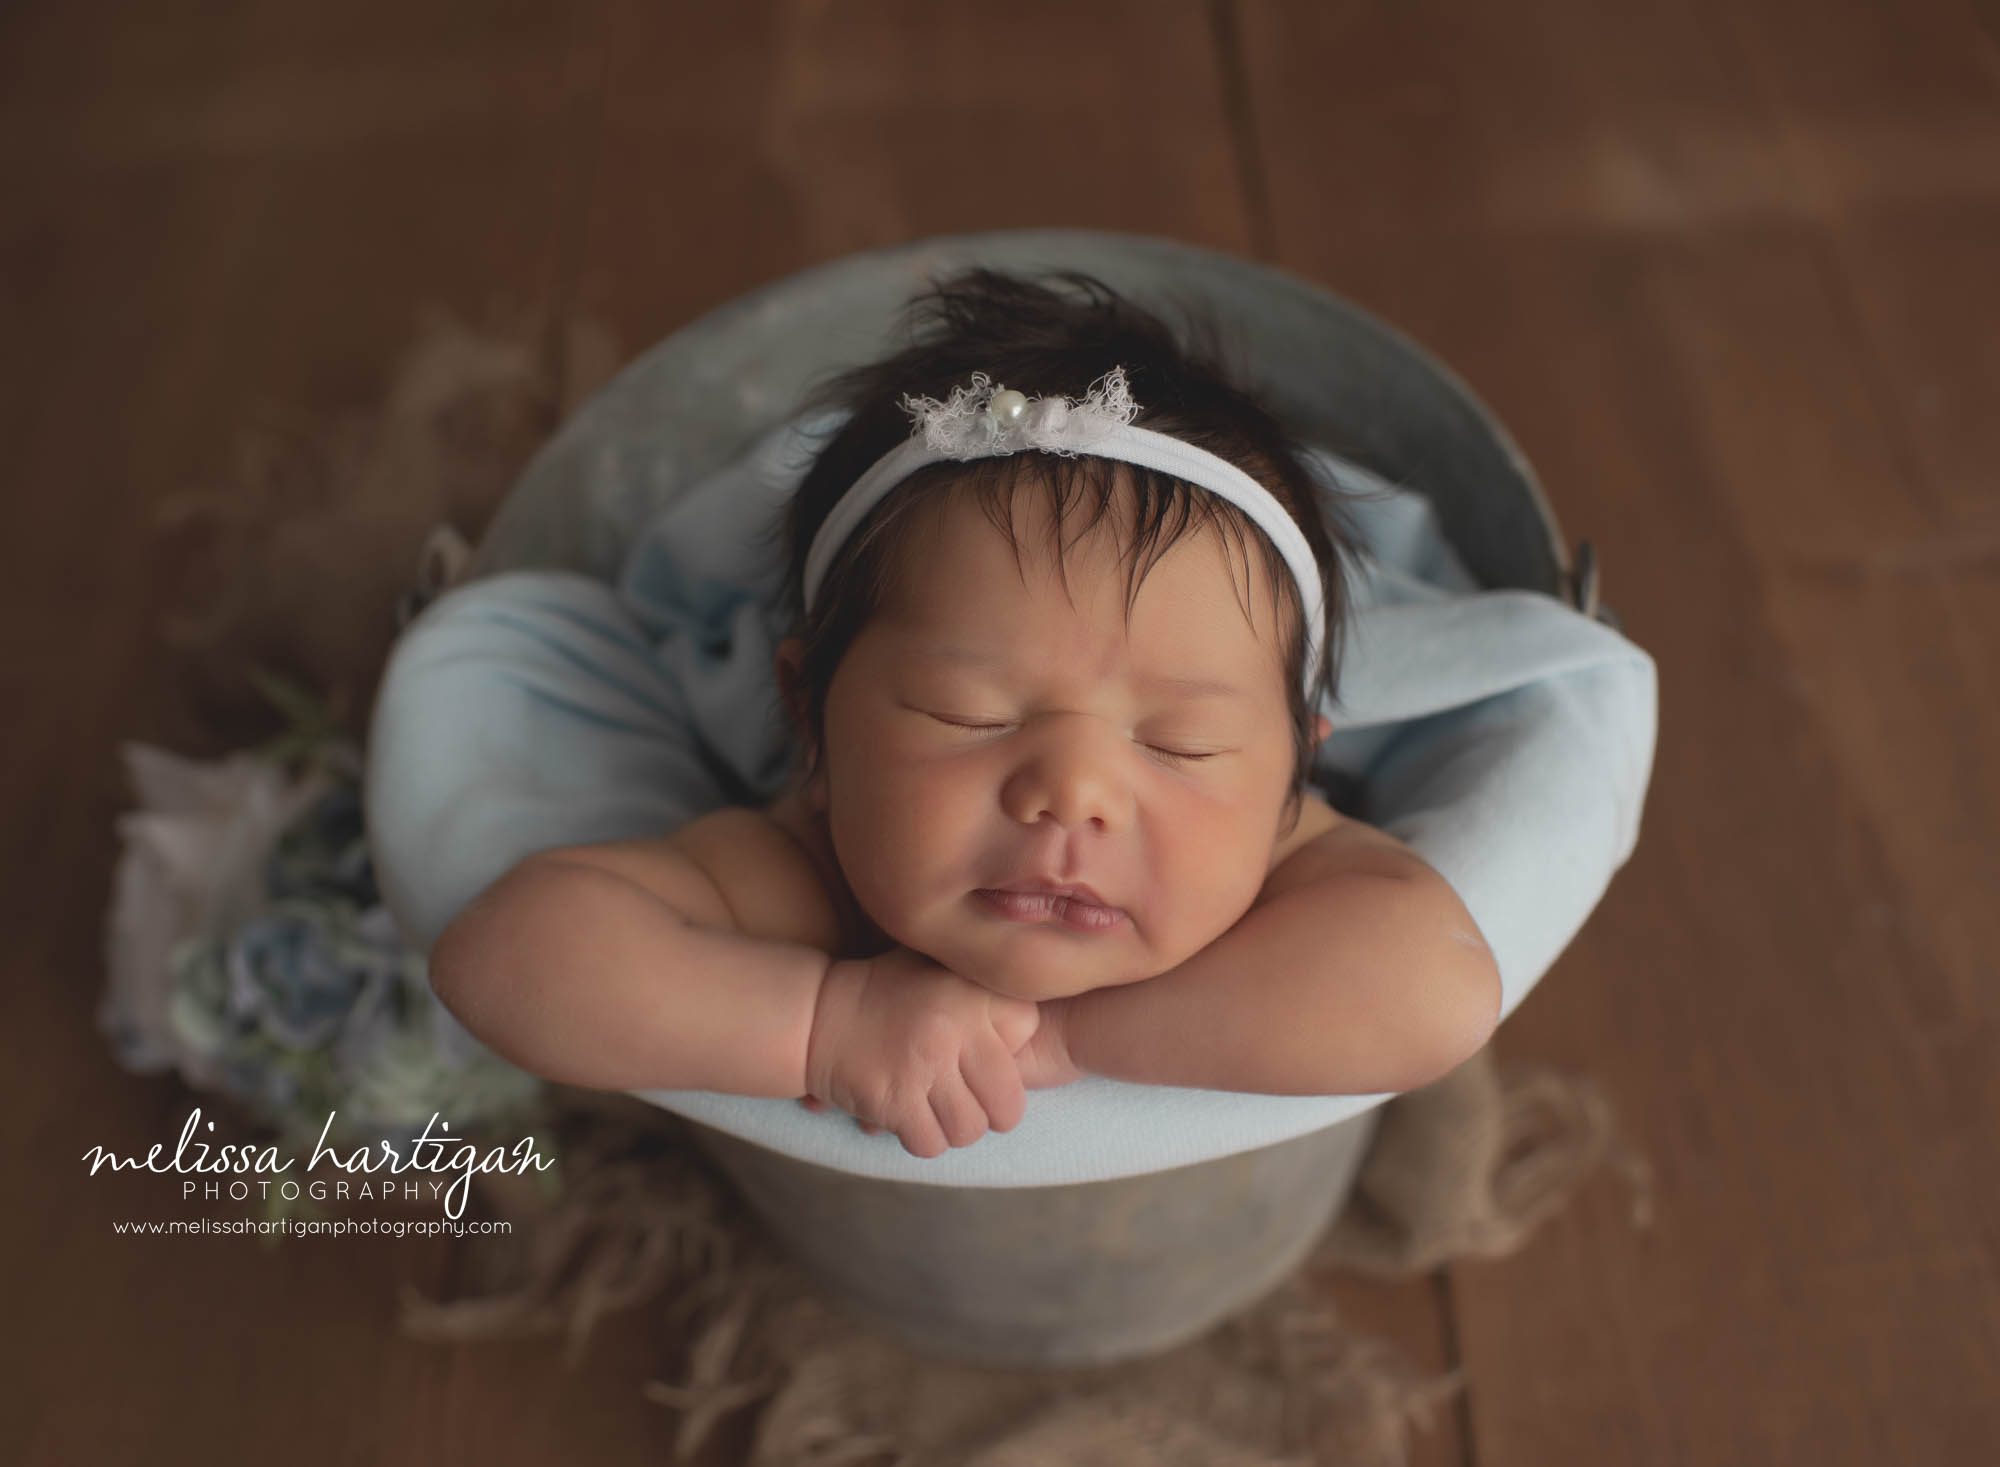 Newborn baby girl pose din metal bucket with light blue wrap and light blue headband tieback with pearls and floral elements